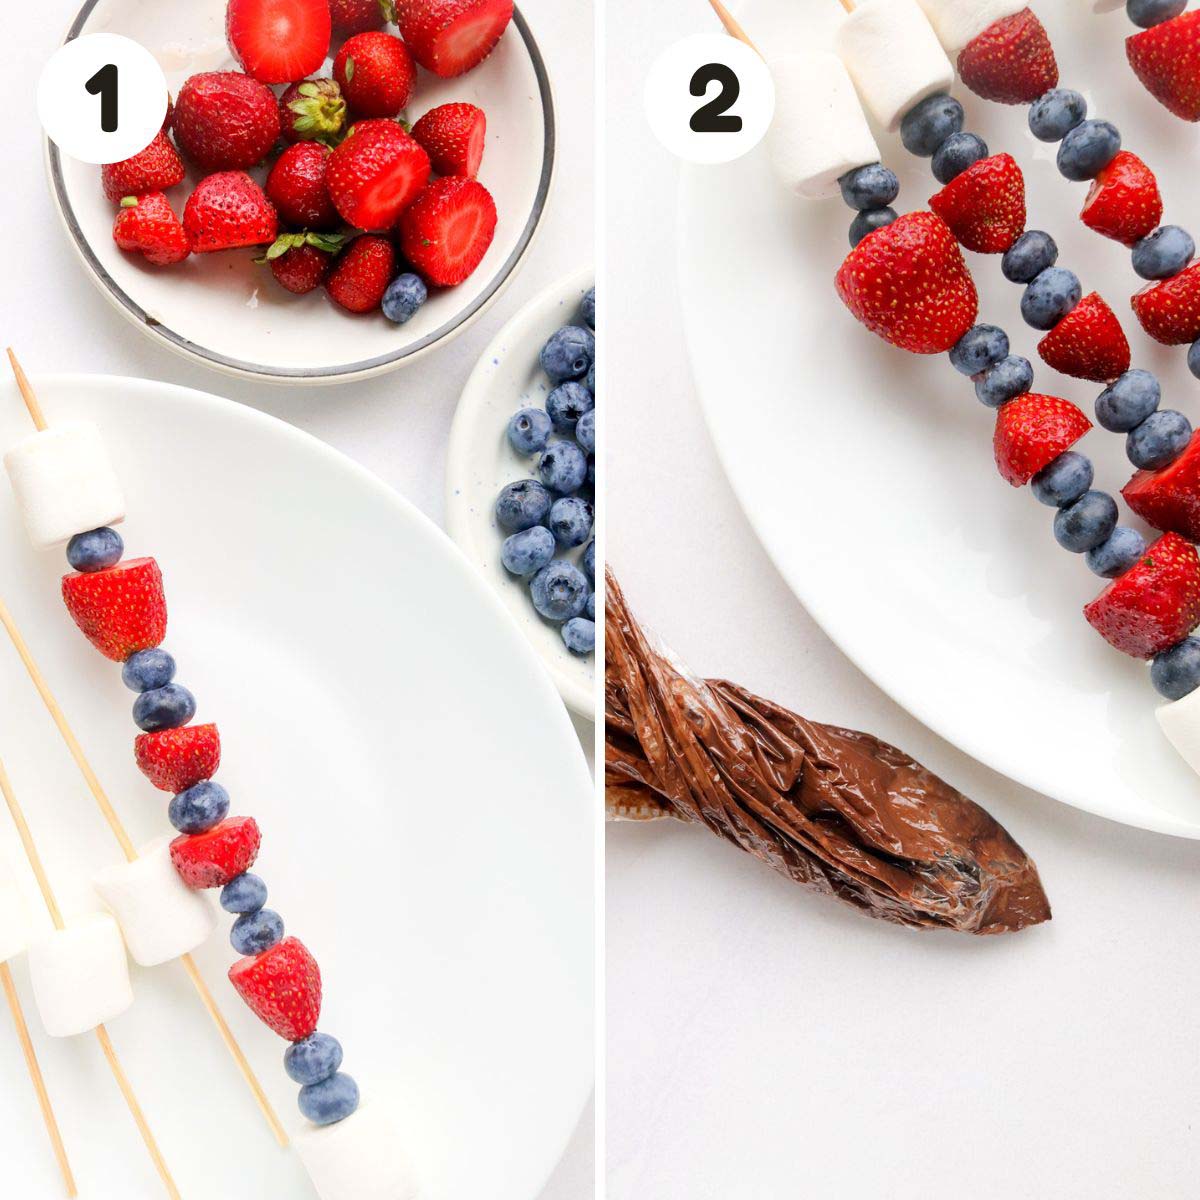 Steps to make the fruit kabobs.